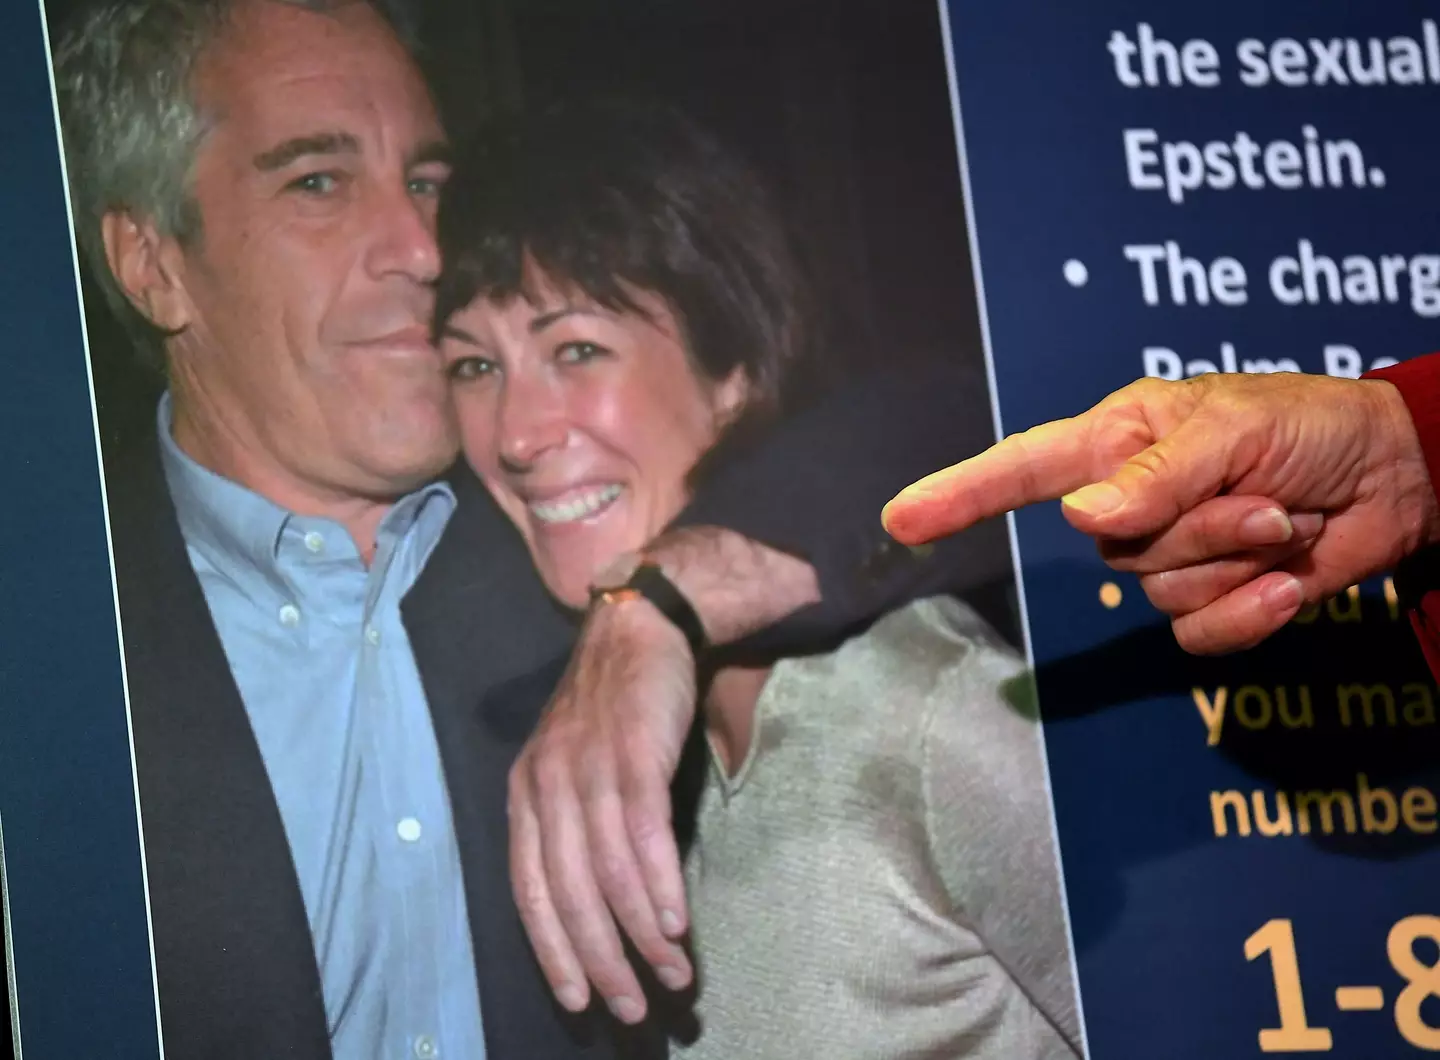 The documents include harrowing accounts from victims of Epstein. (JOHANNES EISELE/AFP via Getty Images)